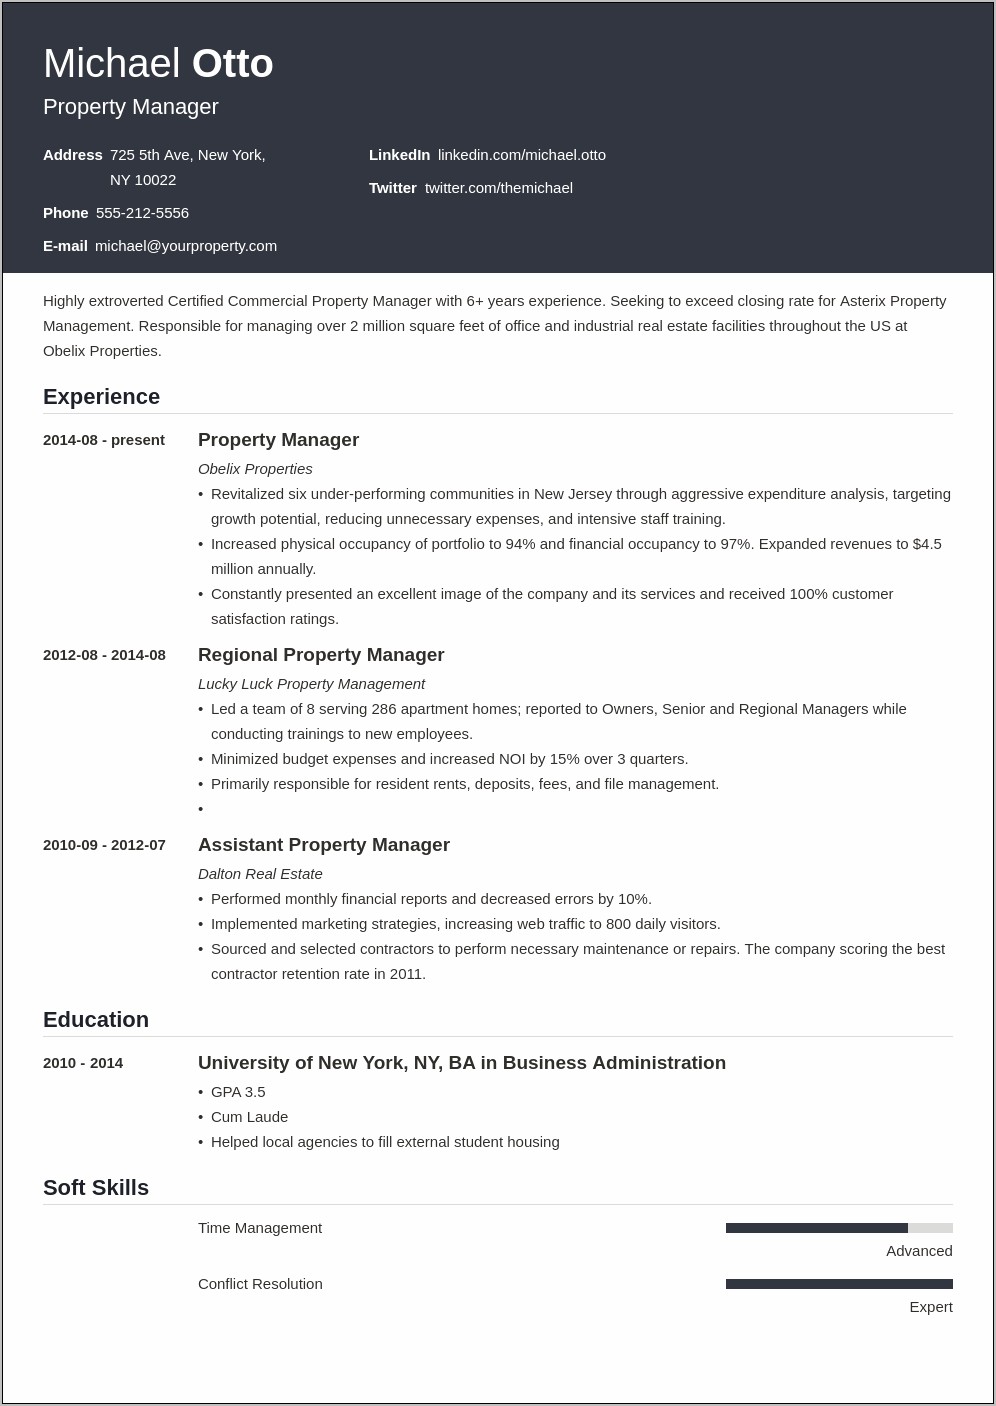 Resume Assistance For Property Manager